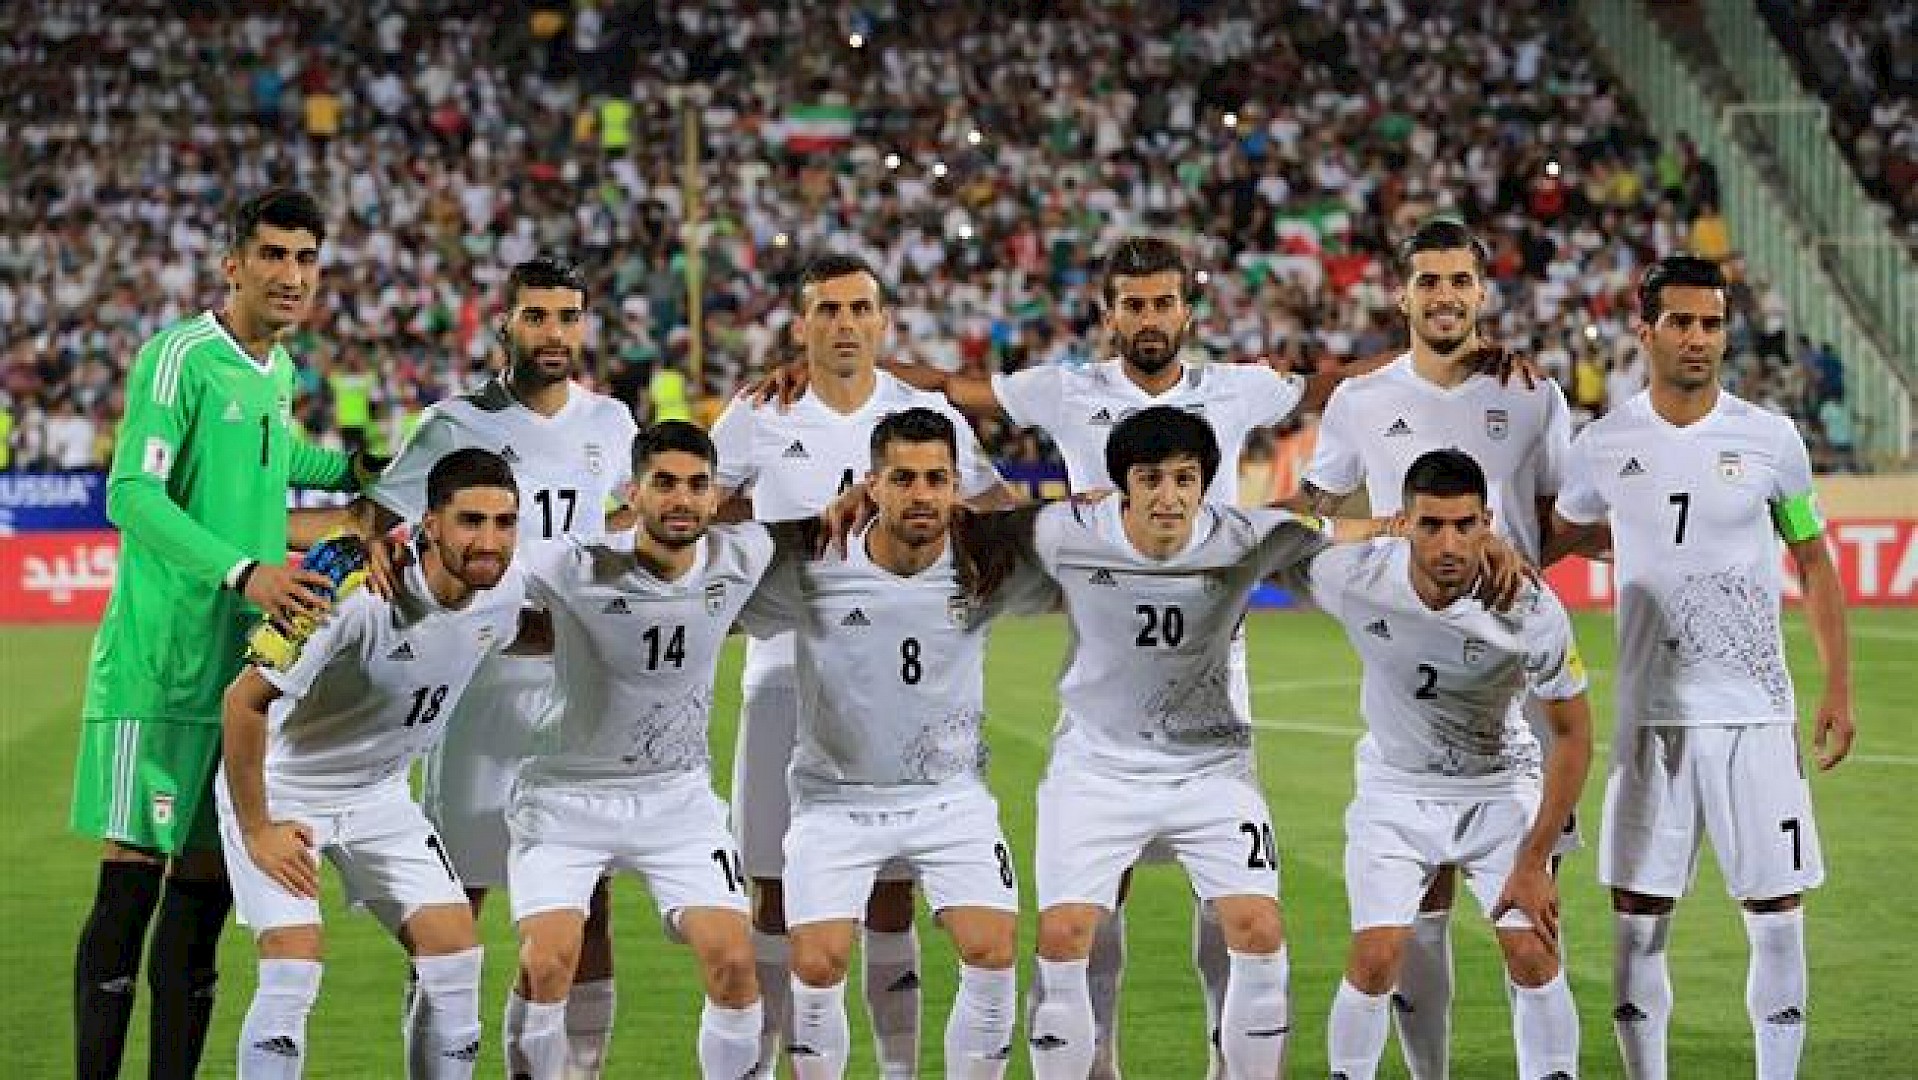 The Changed Perceptions of Iranian Football